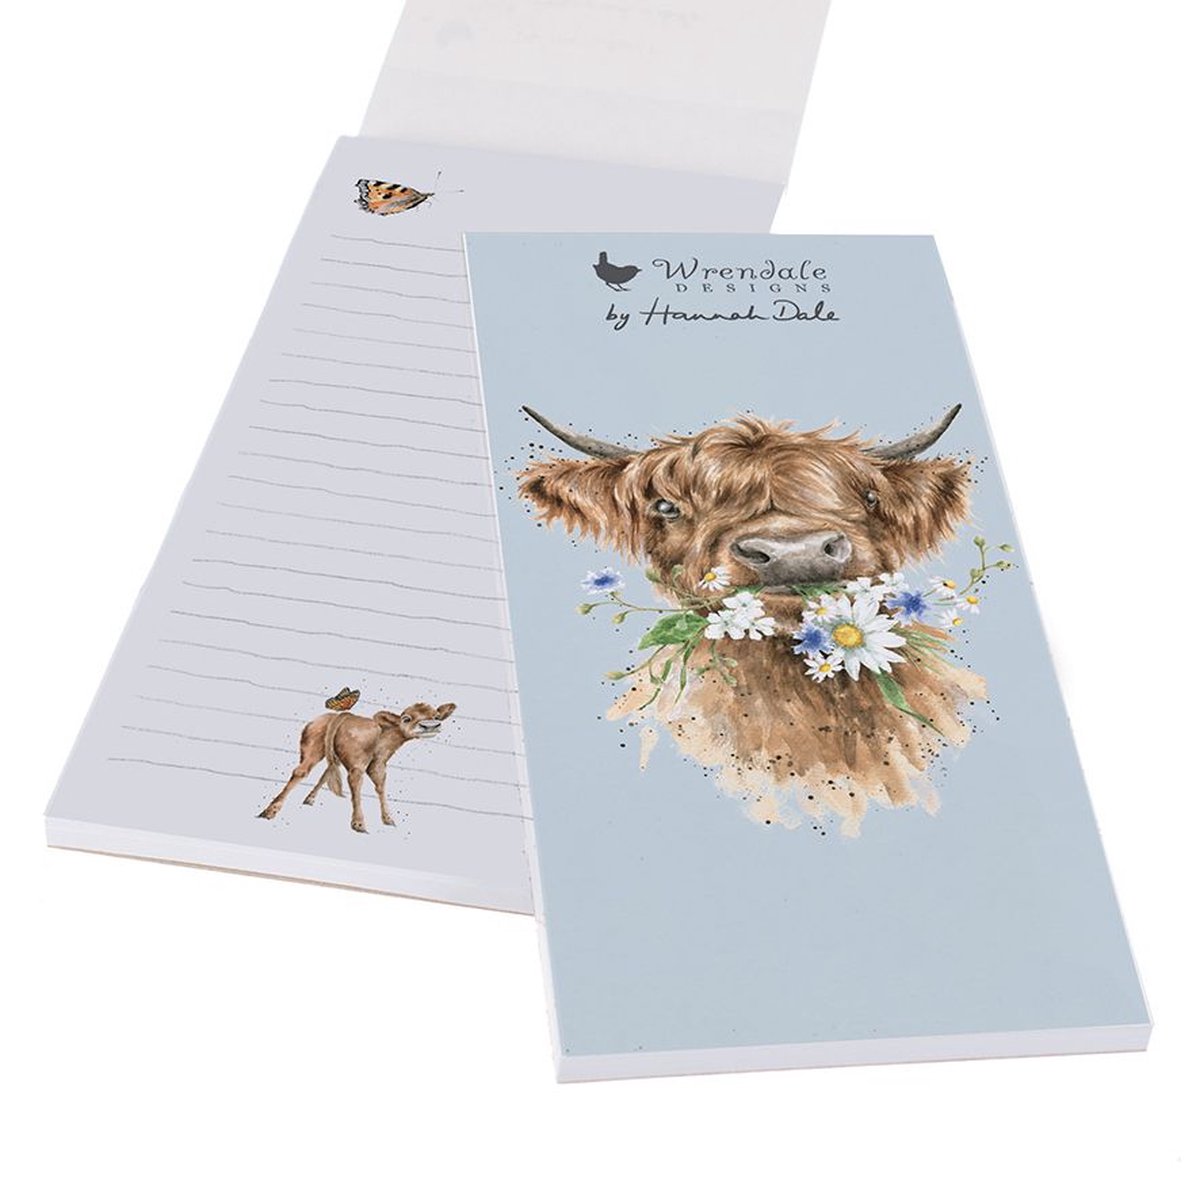 Wrendale Magnetic Shopping Pad - Daisy Coo' Highland Cow Shopping Pad - Magnetisch Boodschappenlijstje